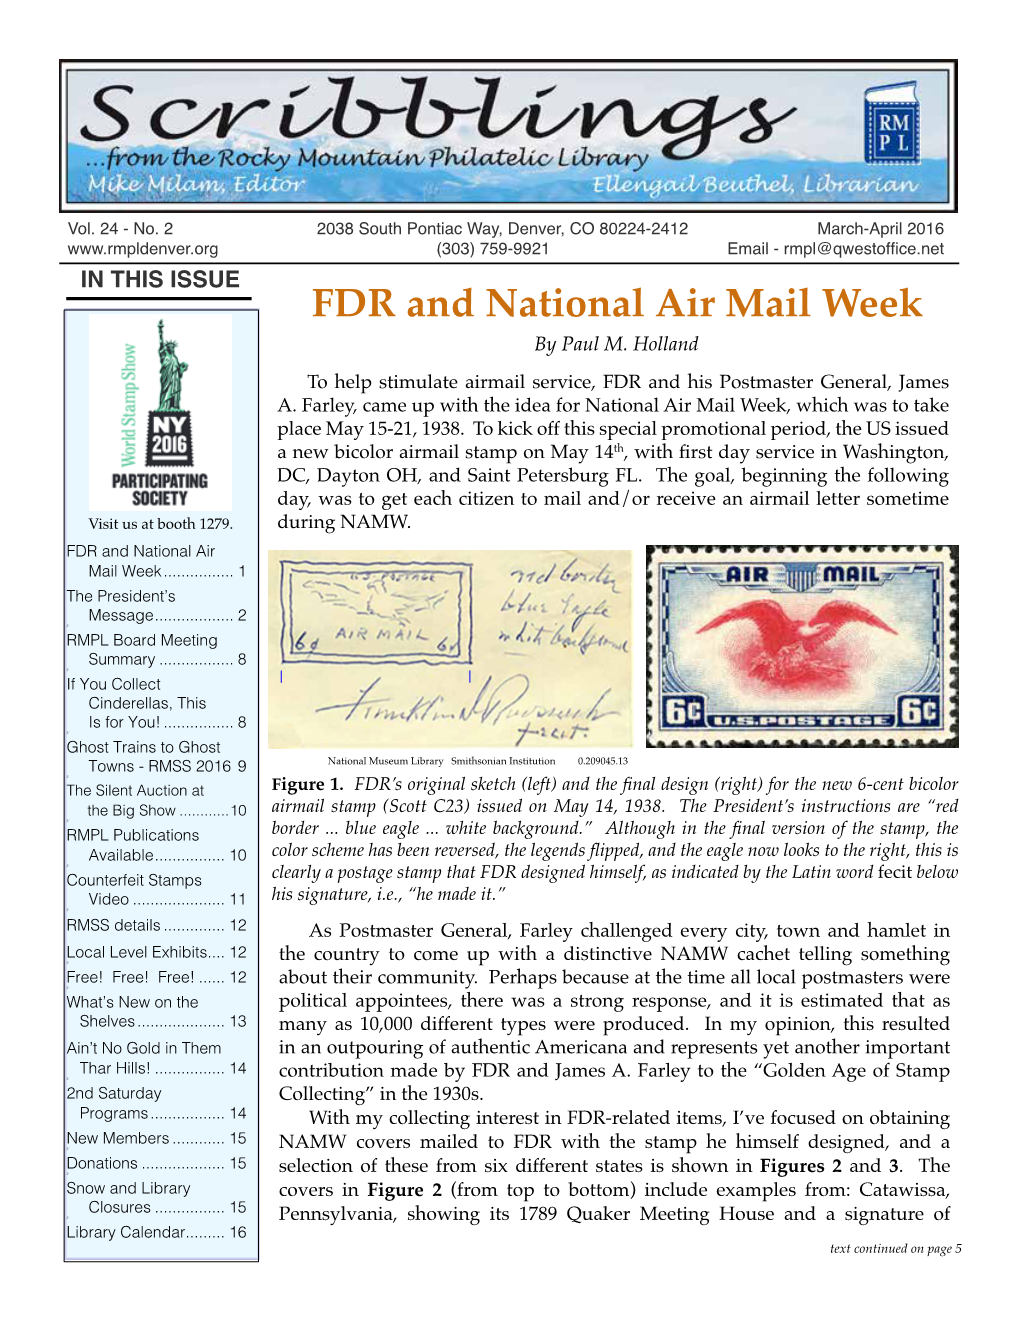 FDR and National Air Mail Week by Paul M